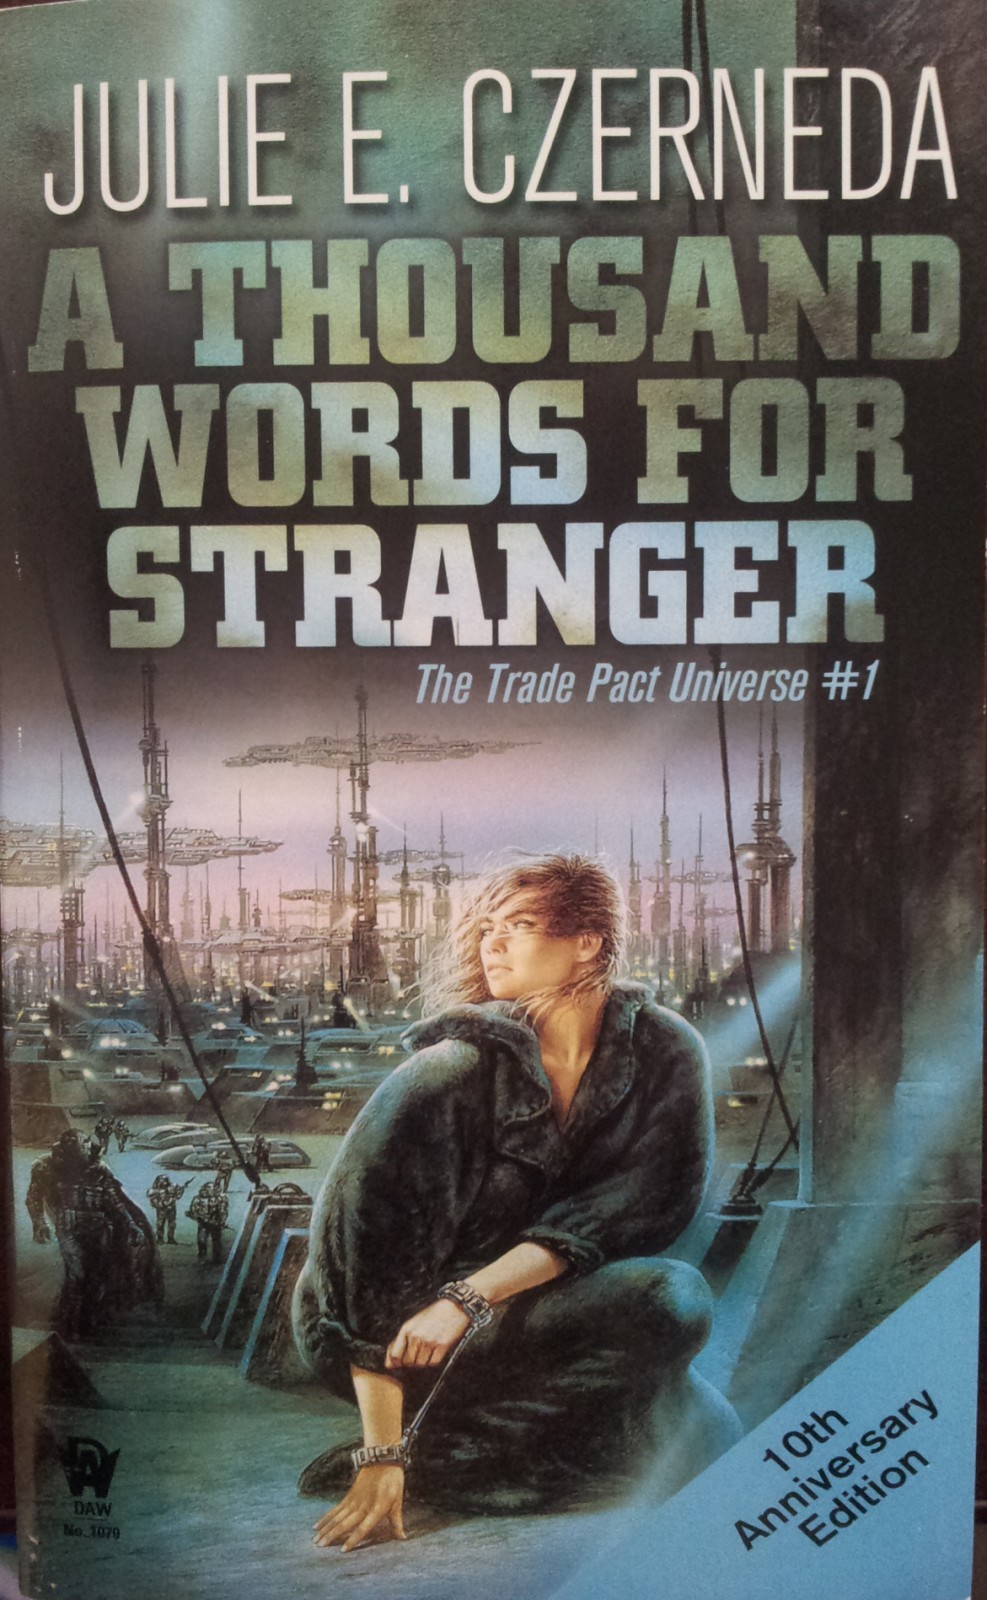 A Thousand Words for Stranger